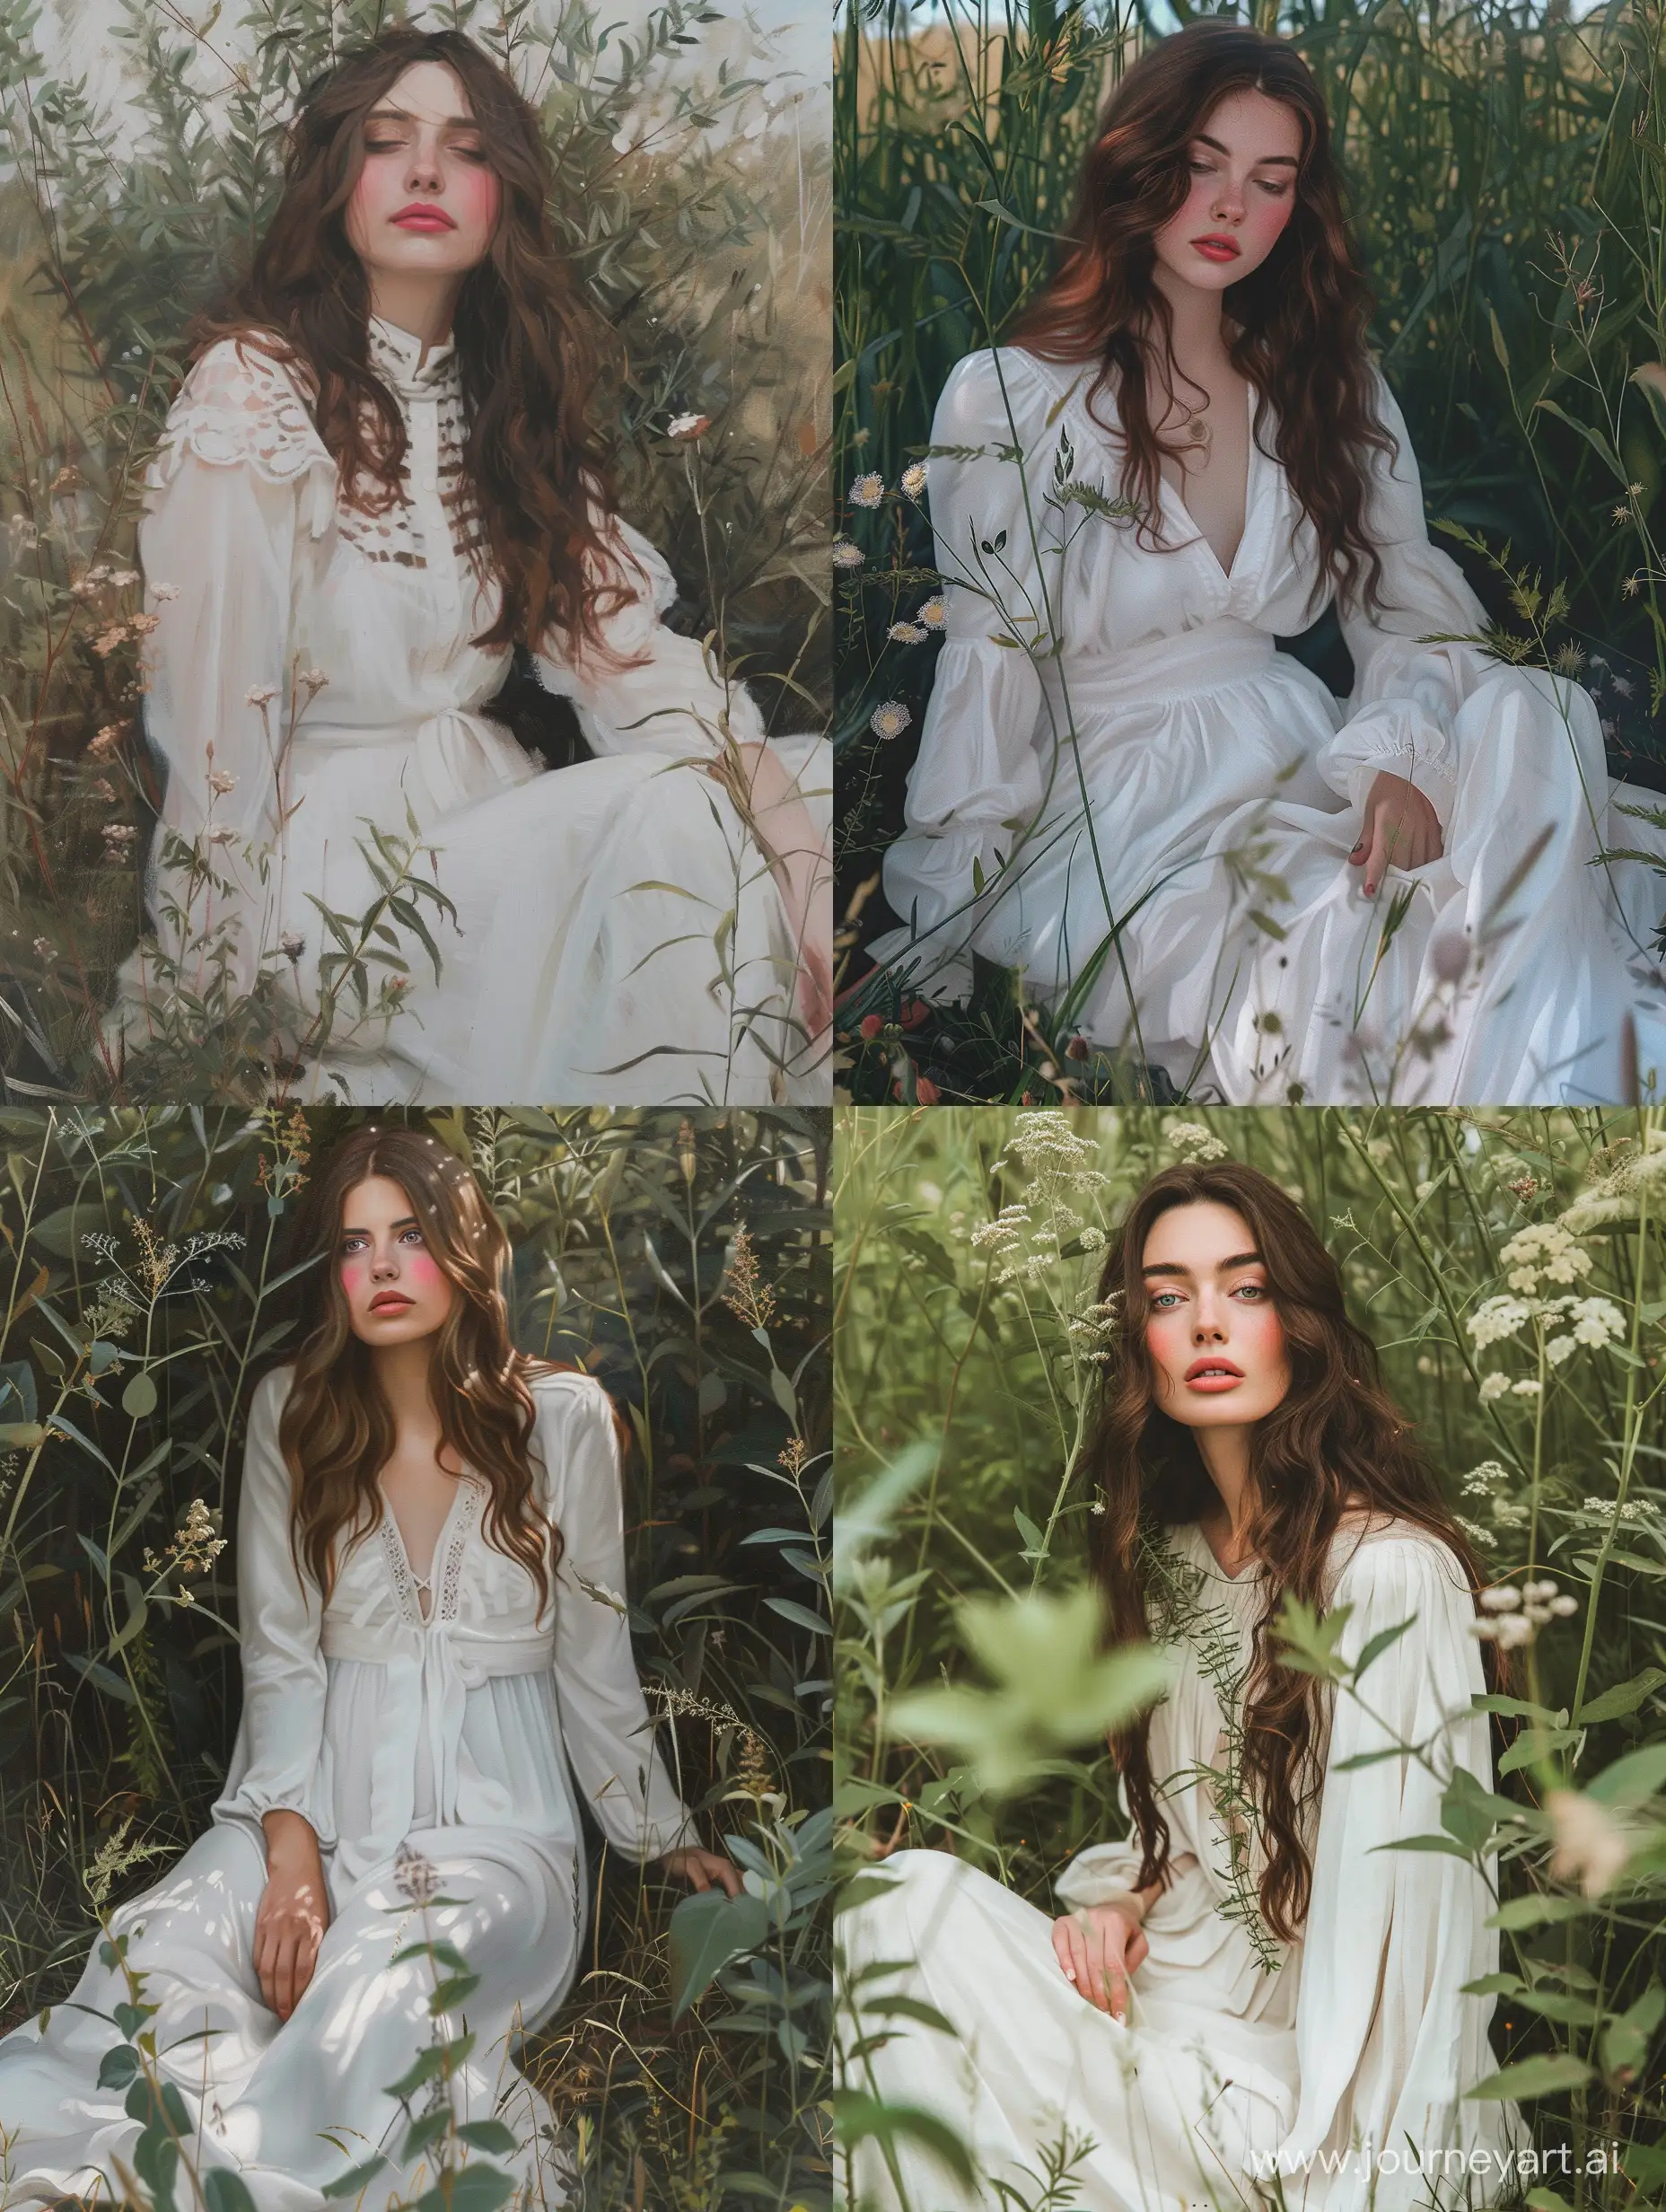 Impressionism Portrait of a woman wearing white long dress,sitting between wild plants in field,rosy cheeks,pink lips, brown long hair , visible paint brush strokes, artwork